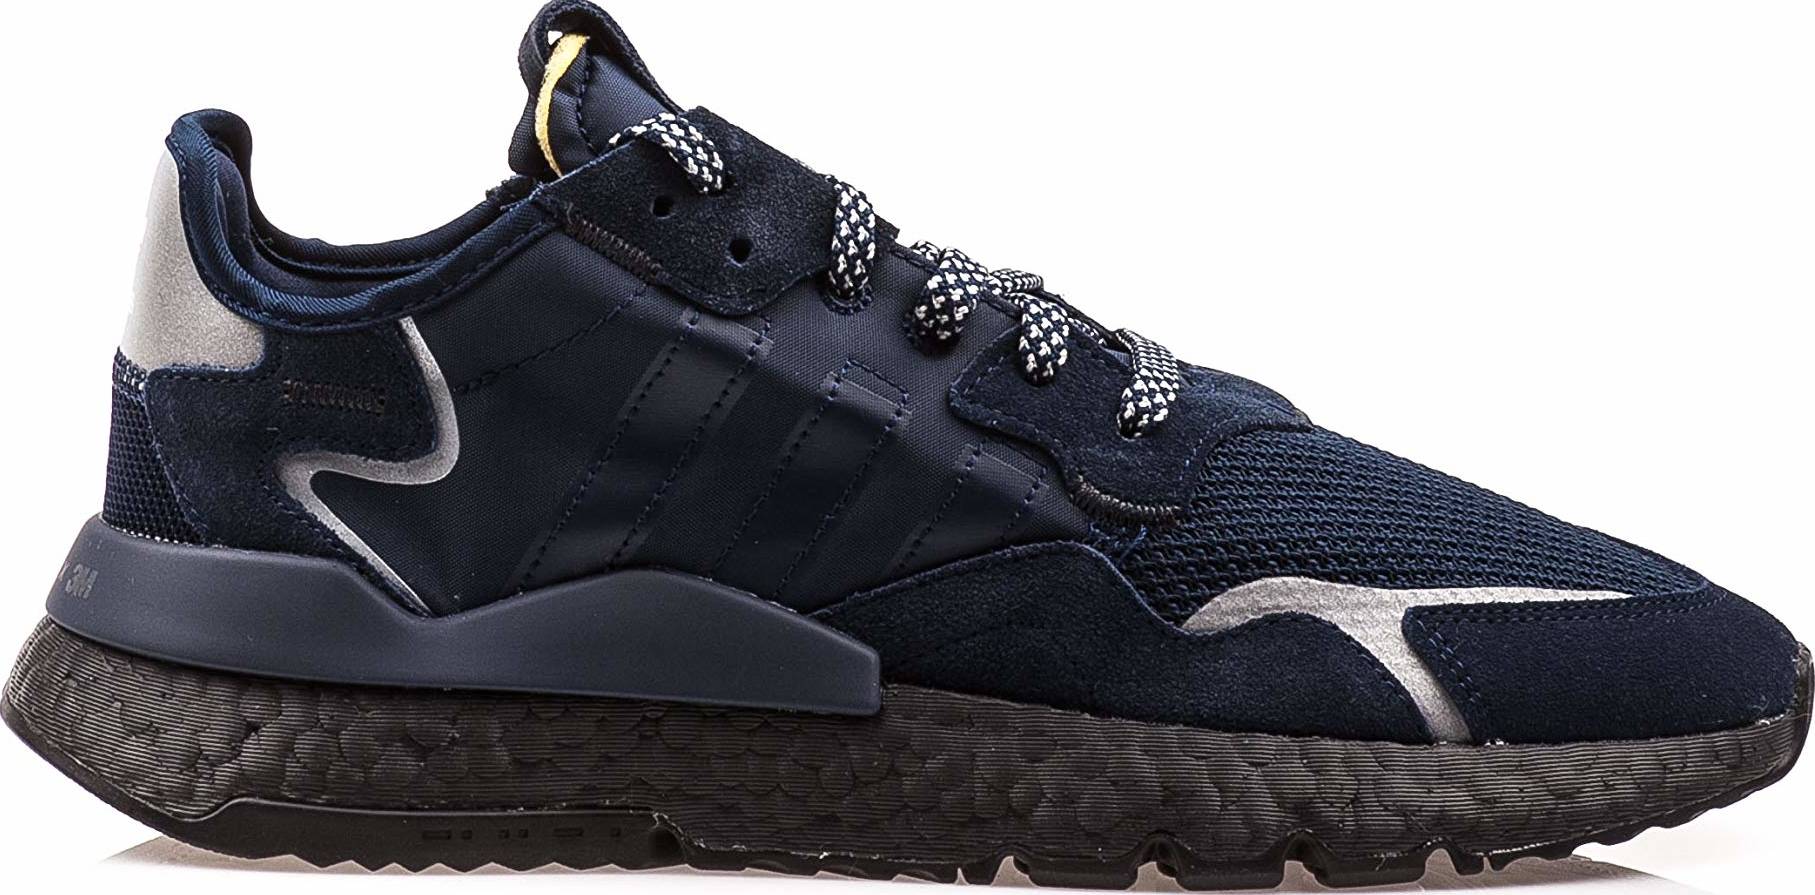 Save 51% on Blue Adidas Sneakers (126 